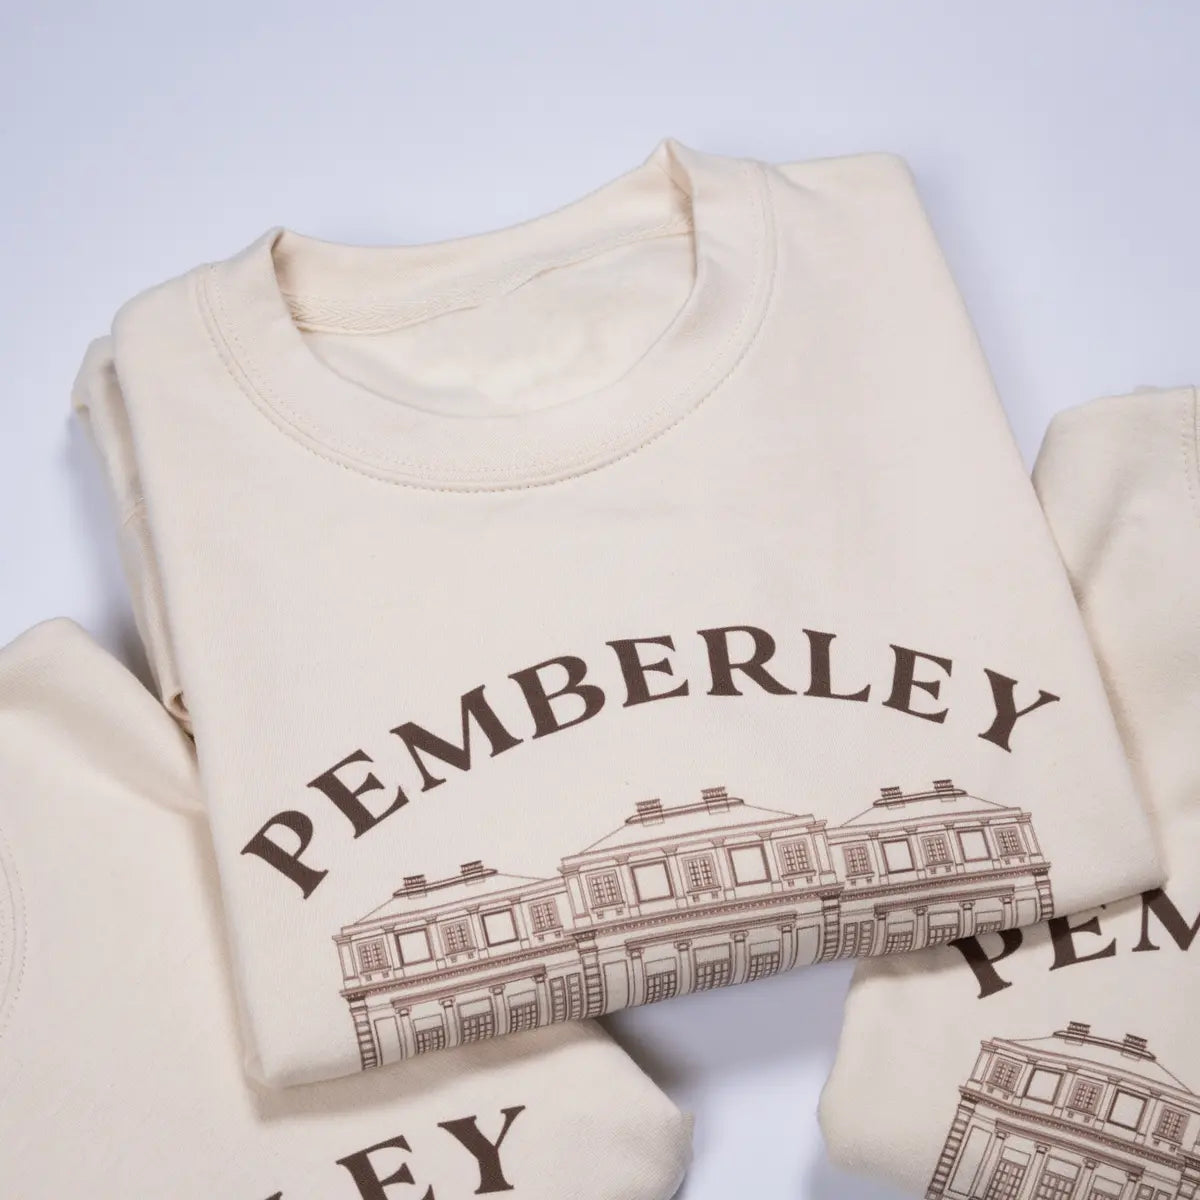 Super-soft Pemberley sweater in beige to celebrate your favourite novel.